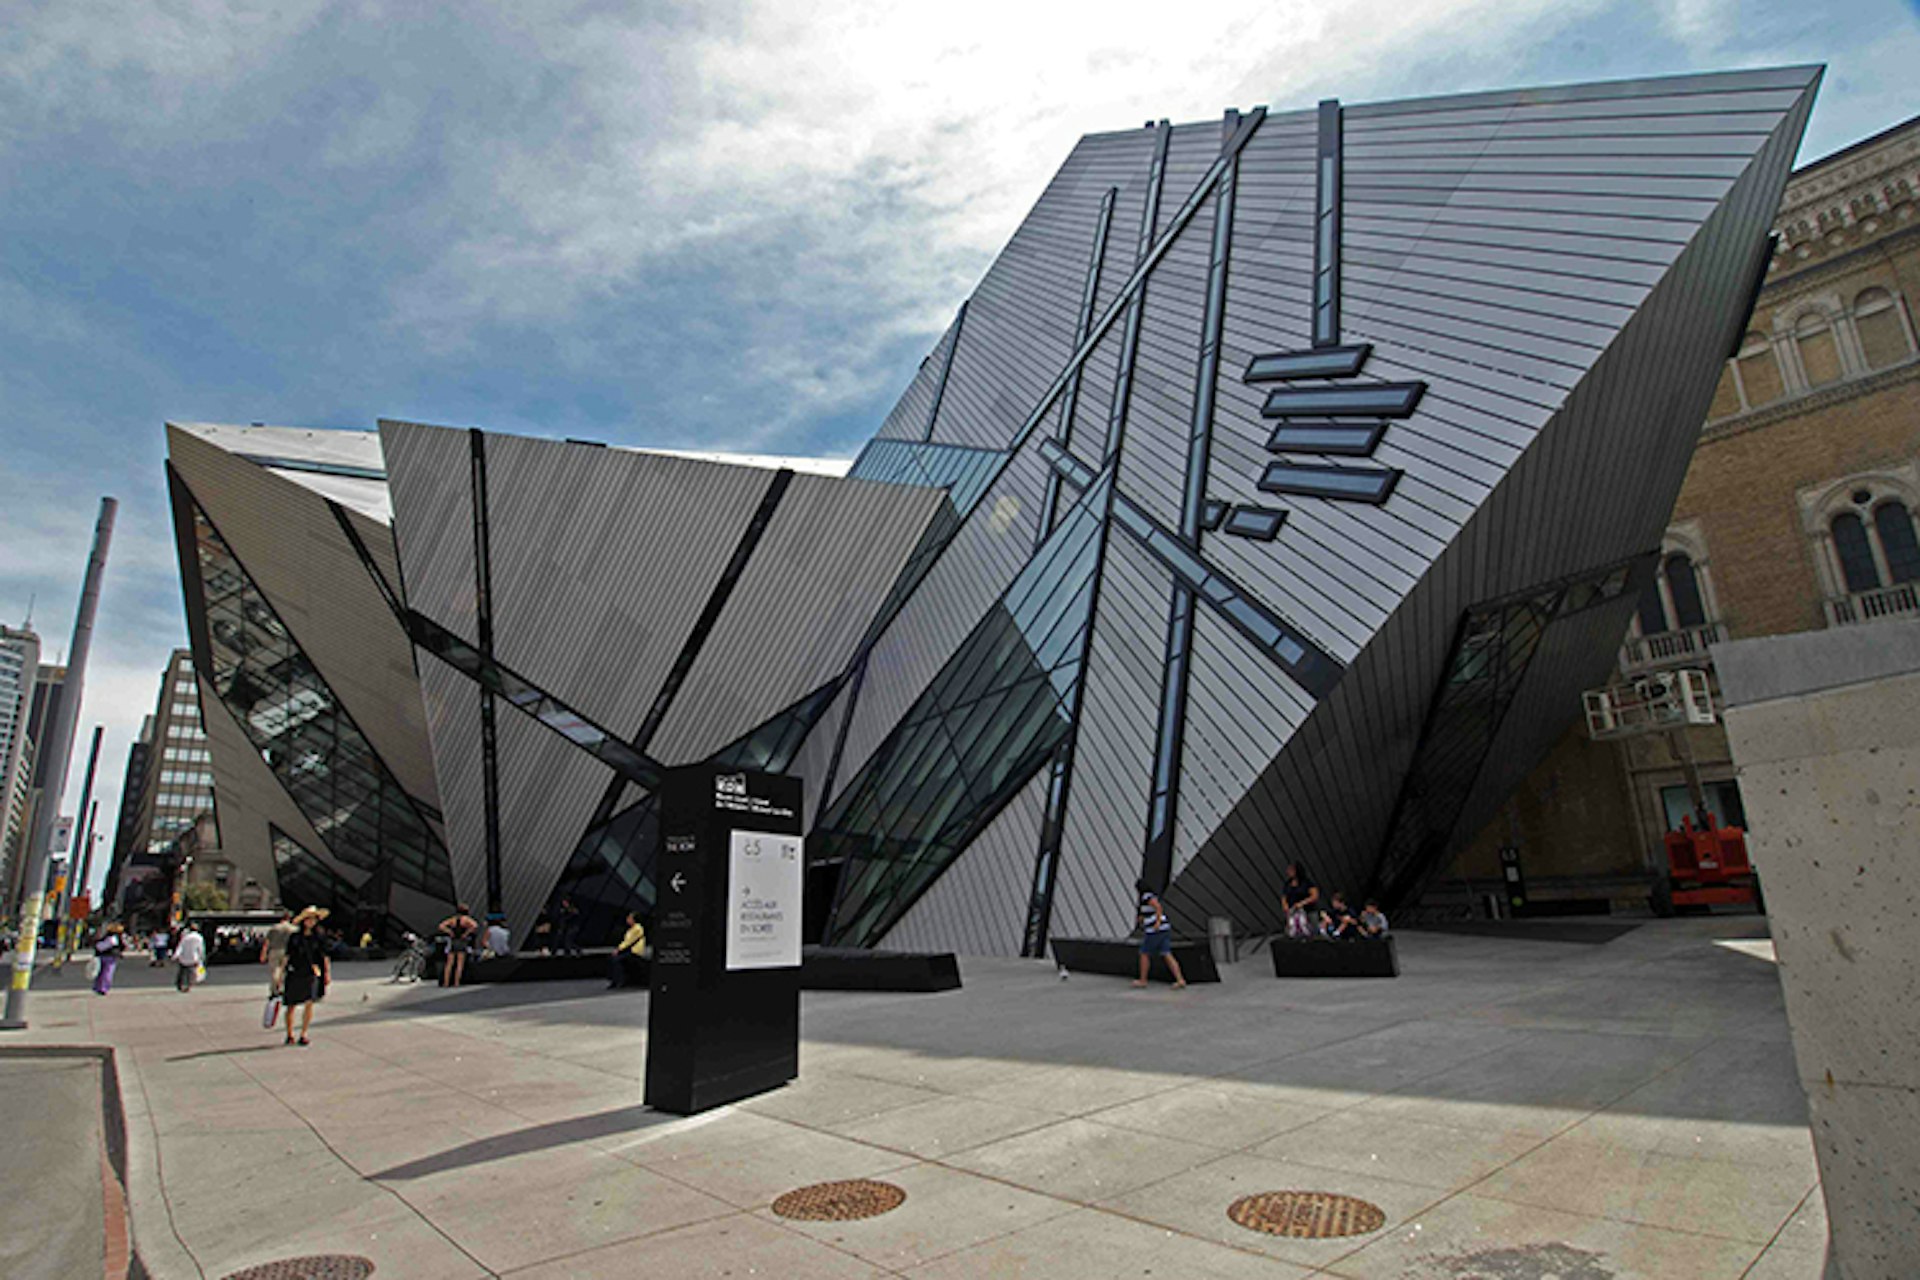 The Royal Ontario Museum. Image by The City of Toronto / CC BY 2.0